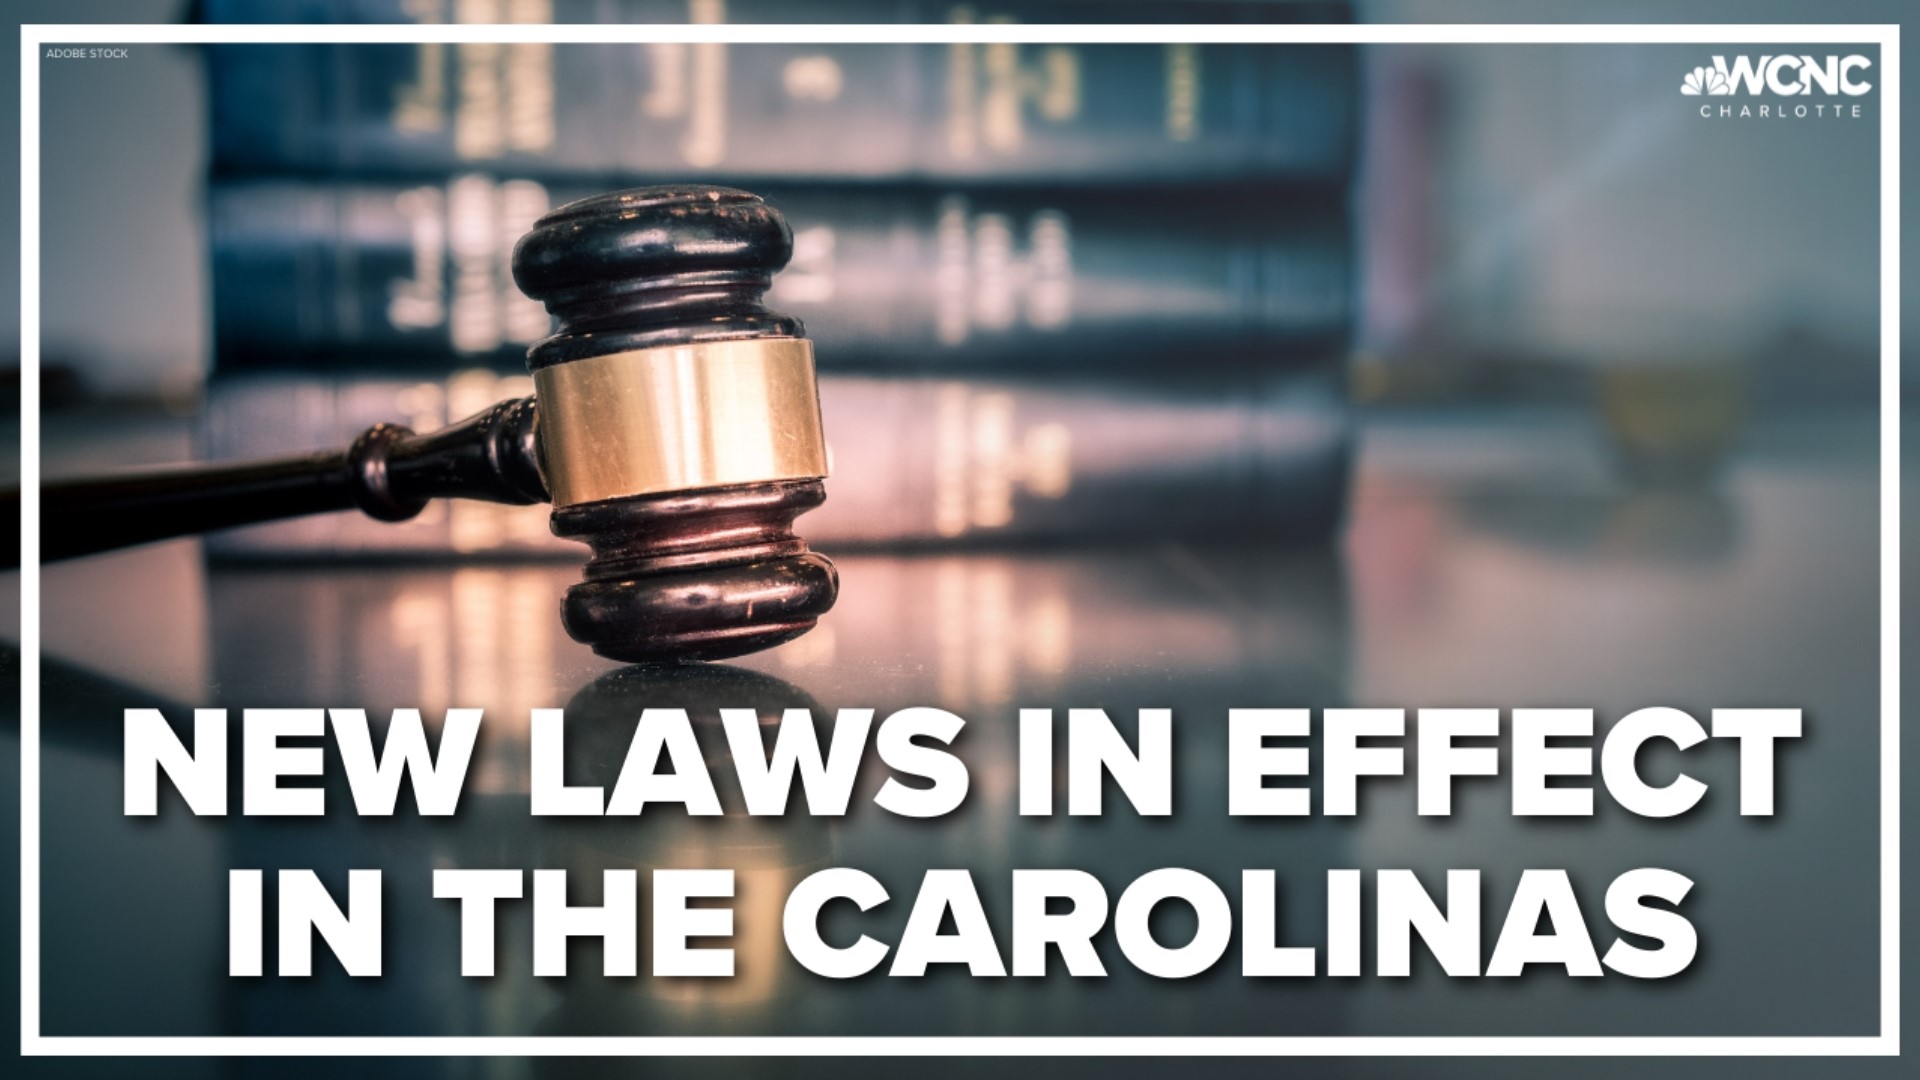 It's July 1, which means new laws go into effect in the Carolinas.